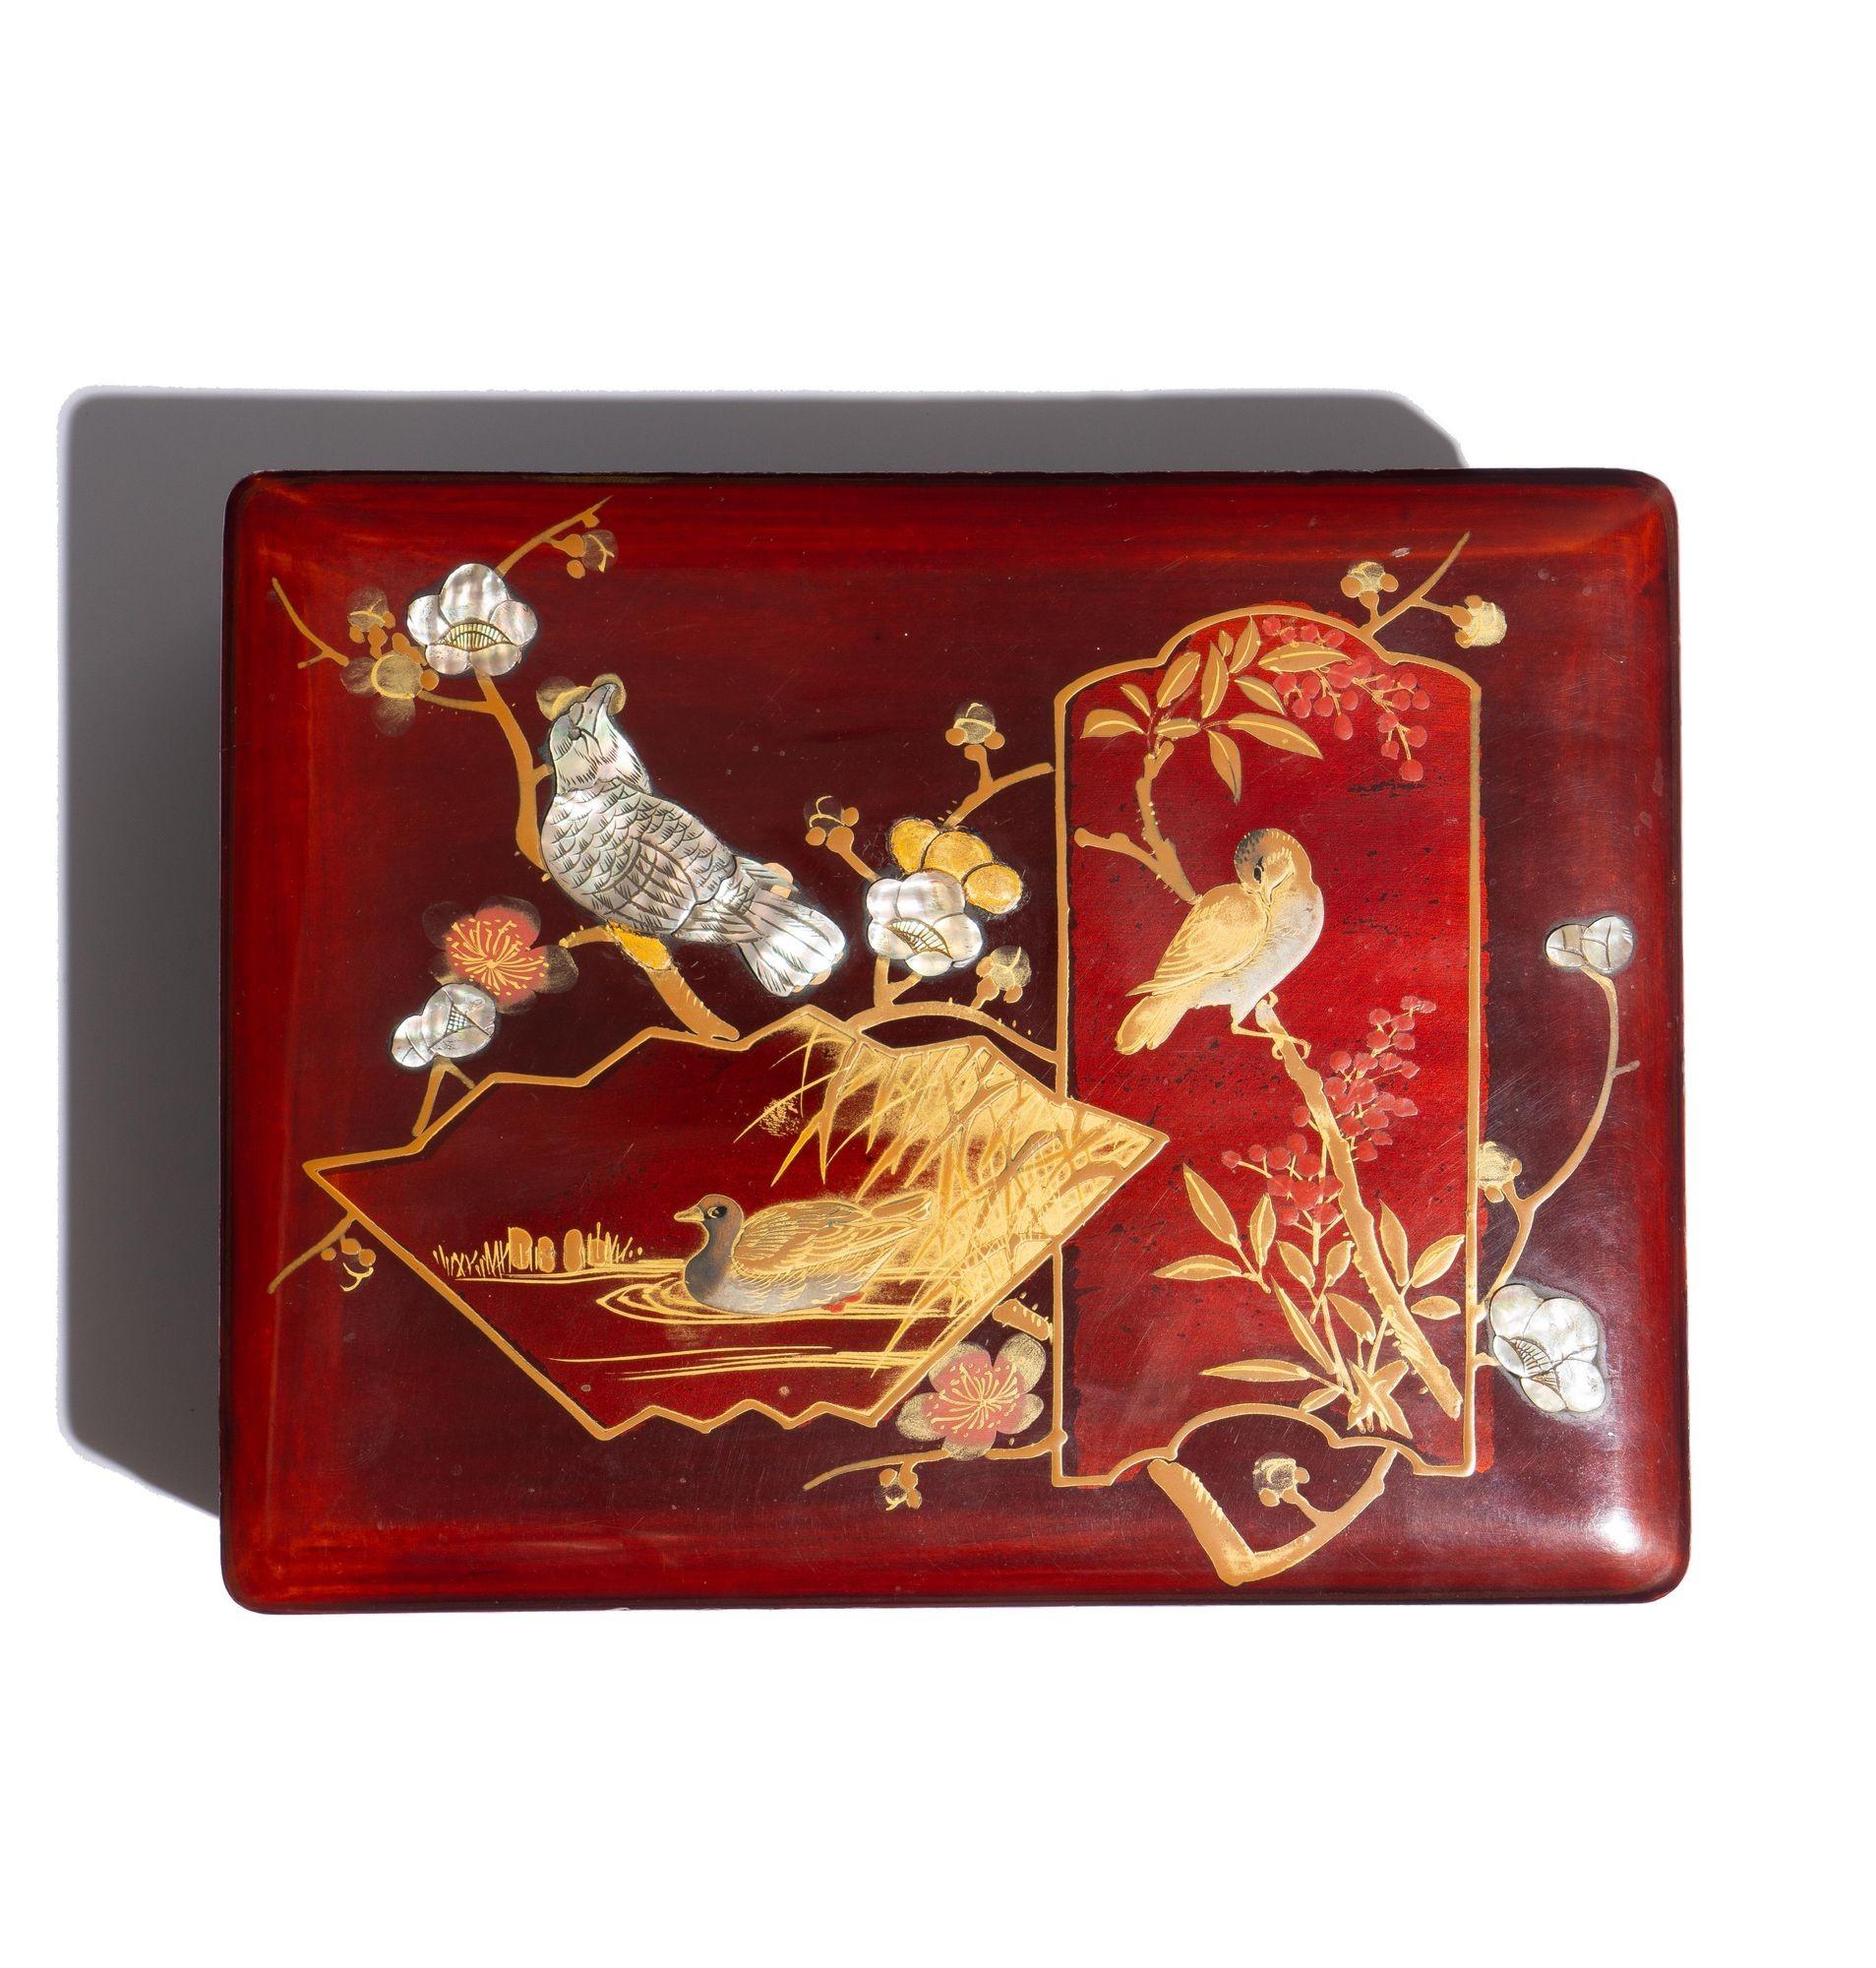 Japanese lacquered box with hinged lid. The lid is decorated in gilt with red enamel and abalone inlays on a burgundy red ground. A motif of birds and apple blossoms are rendered in three over lay vignettes.
Japan, circa 19th century.